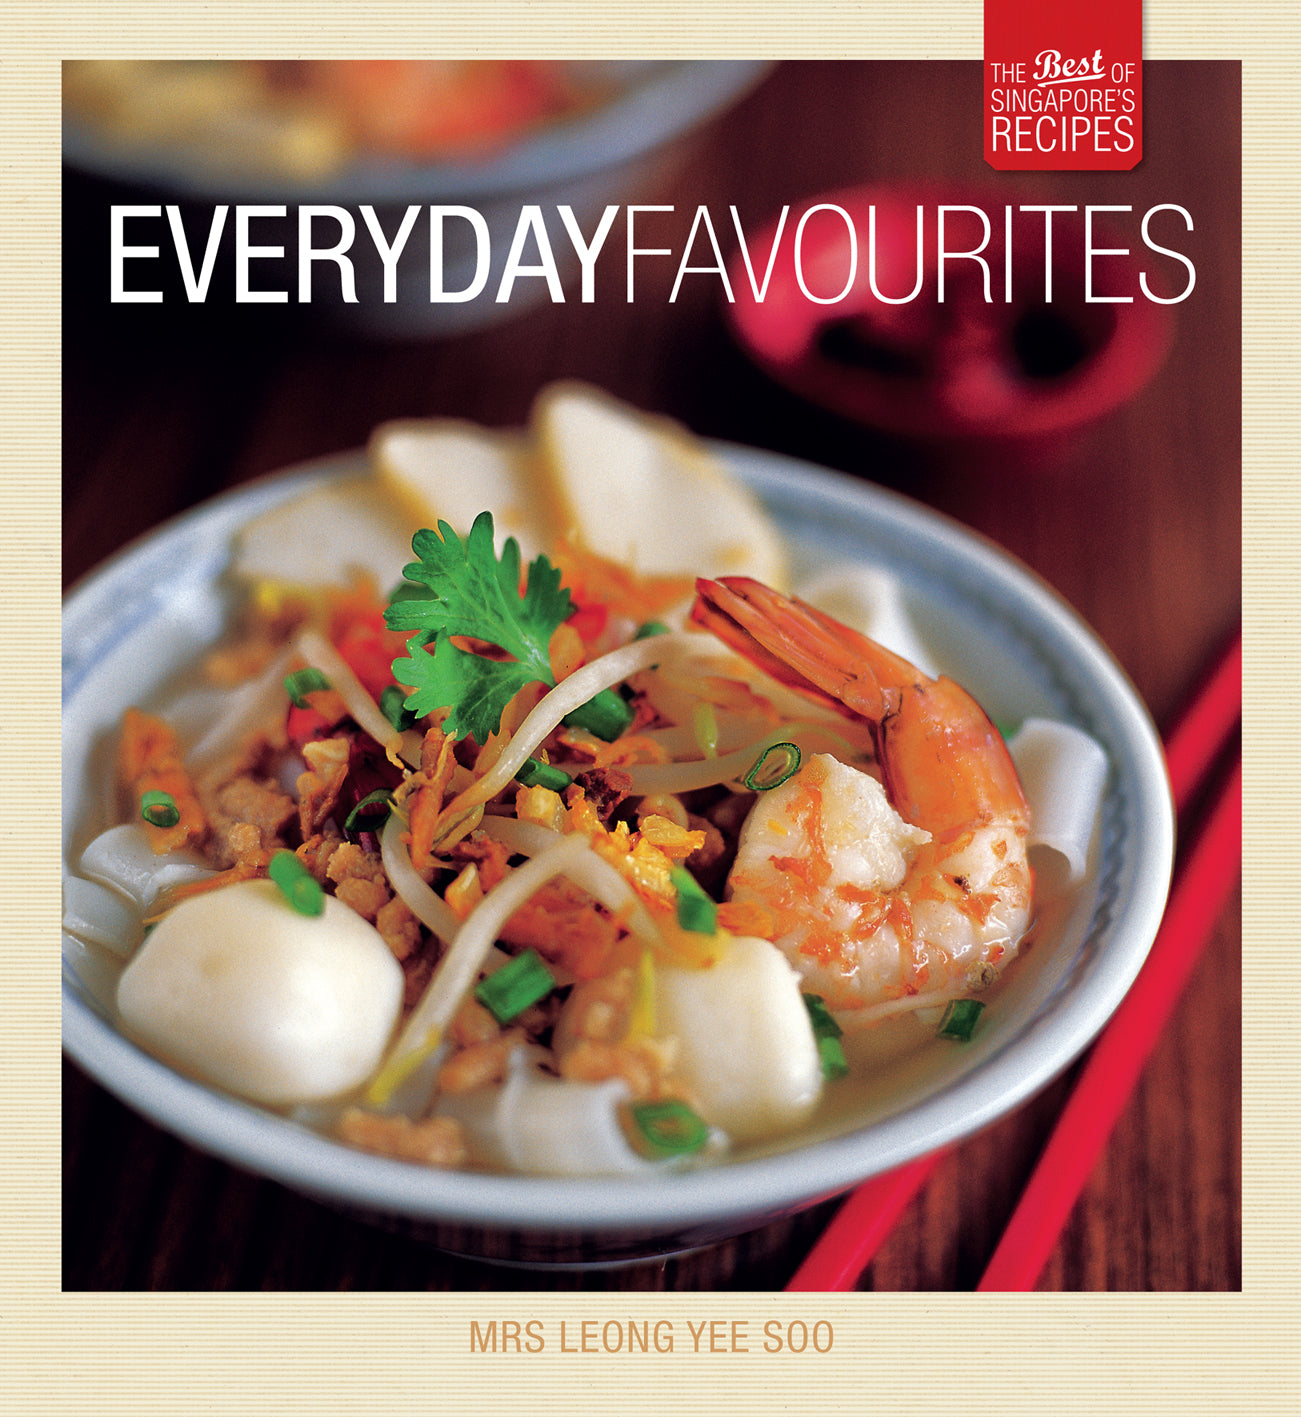 The Best of Singapore's Recipes: Everyday Favourites